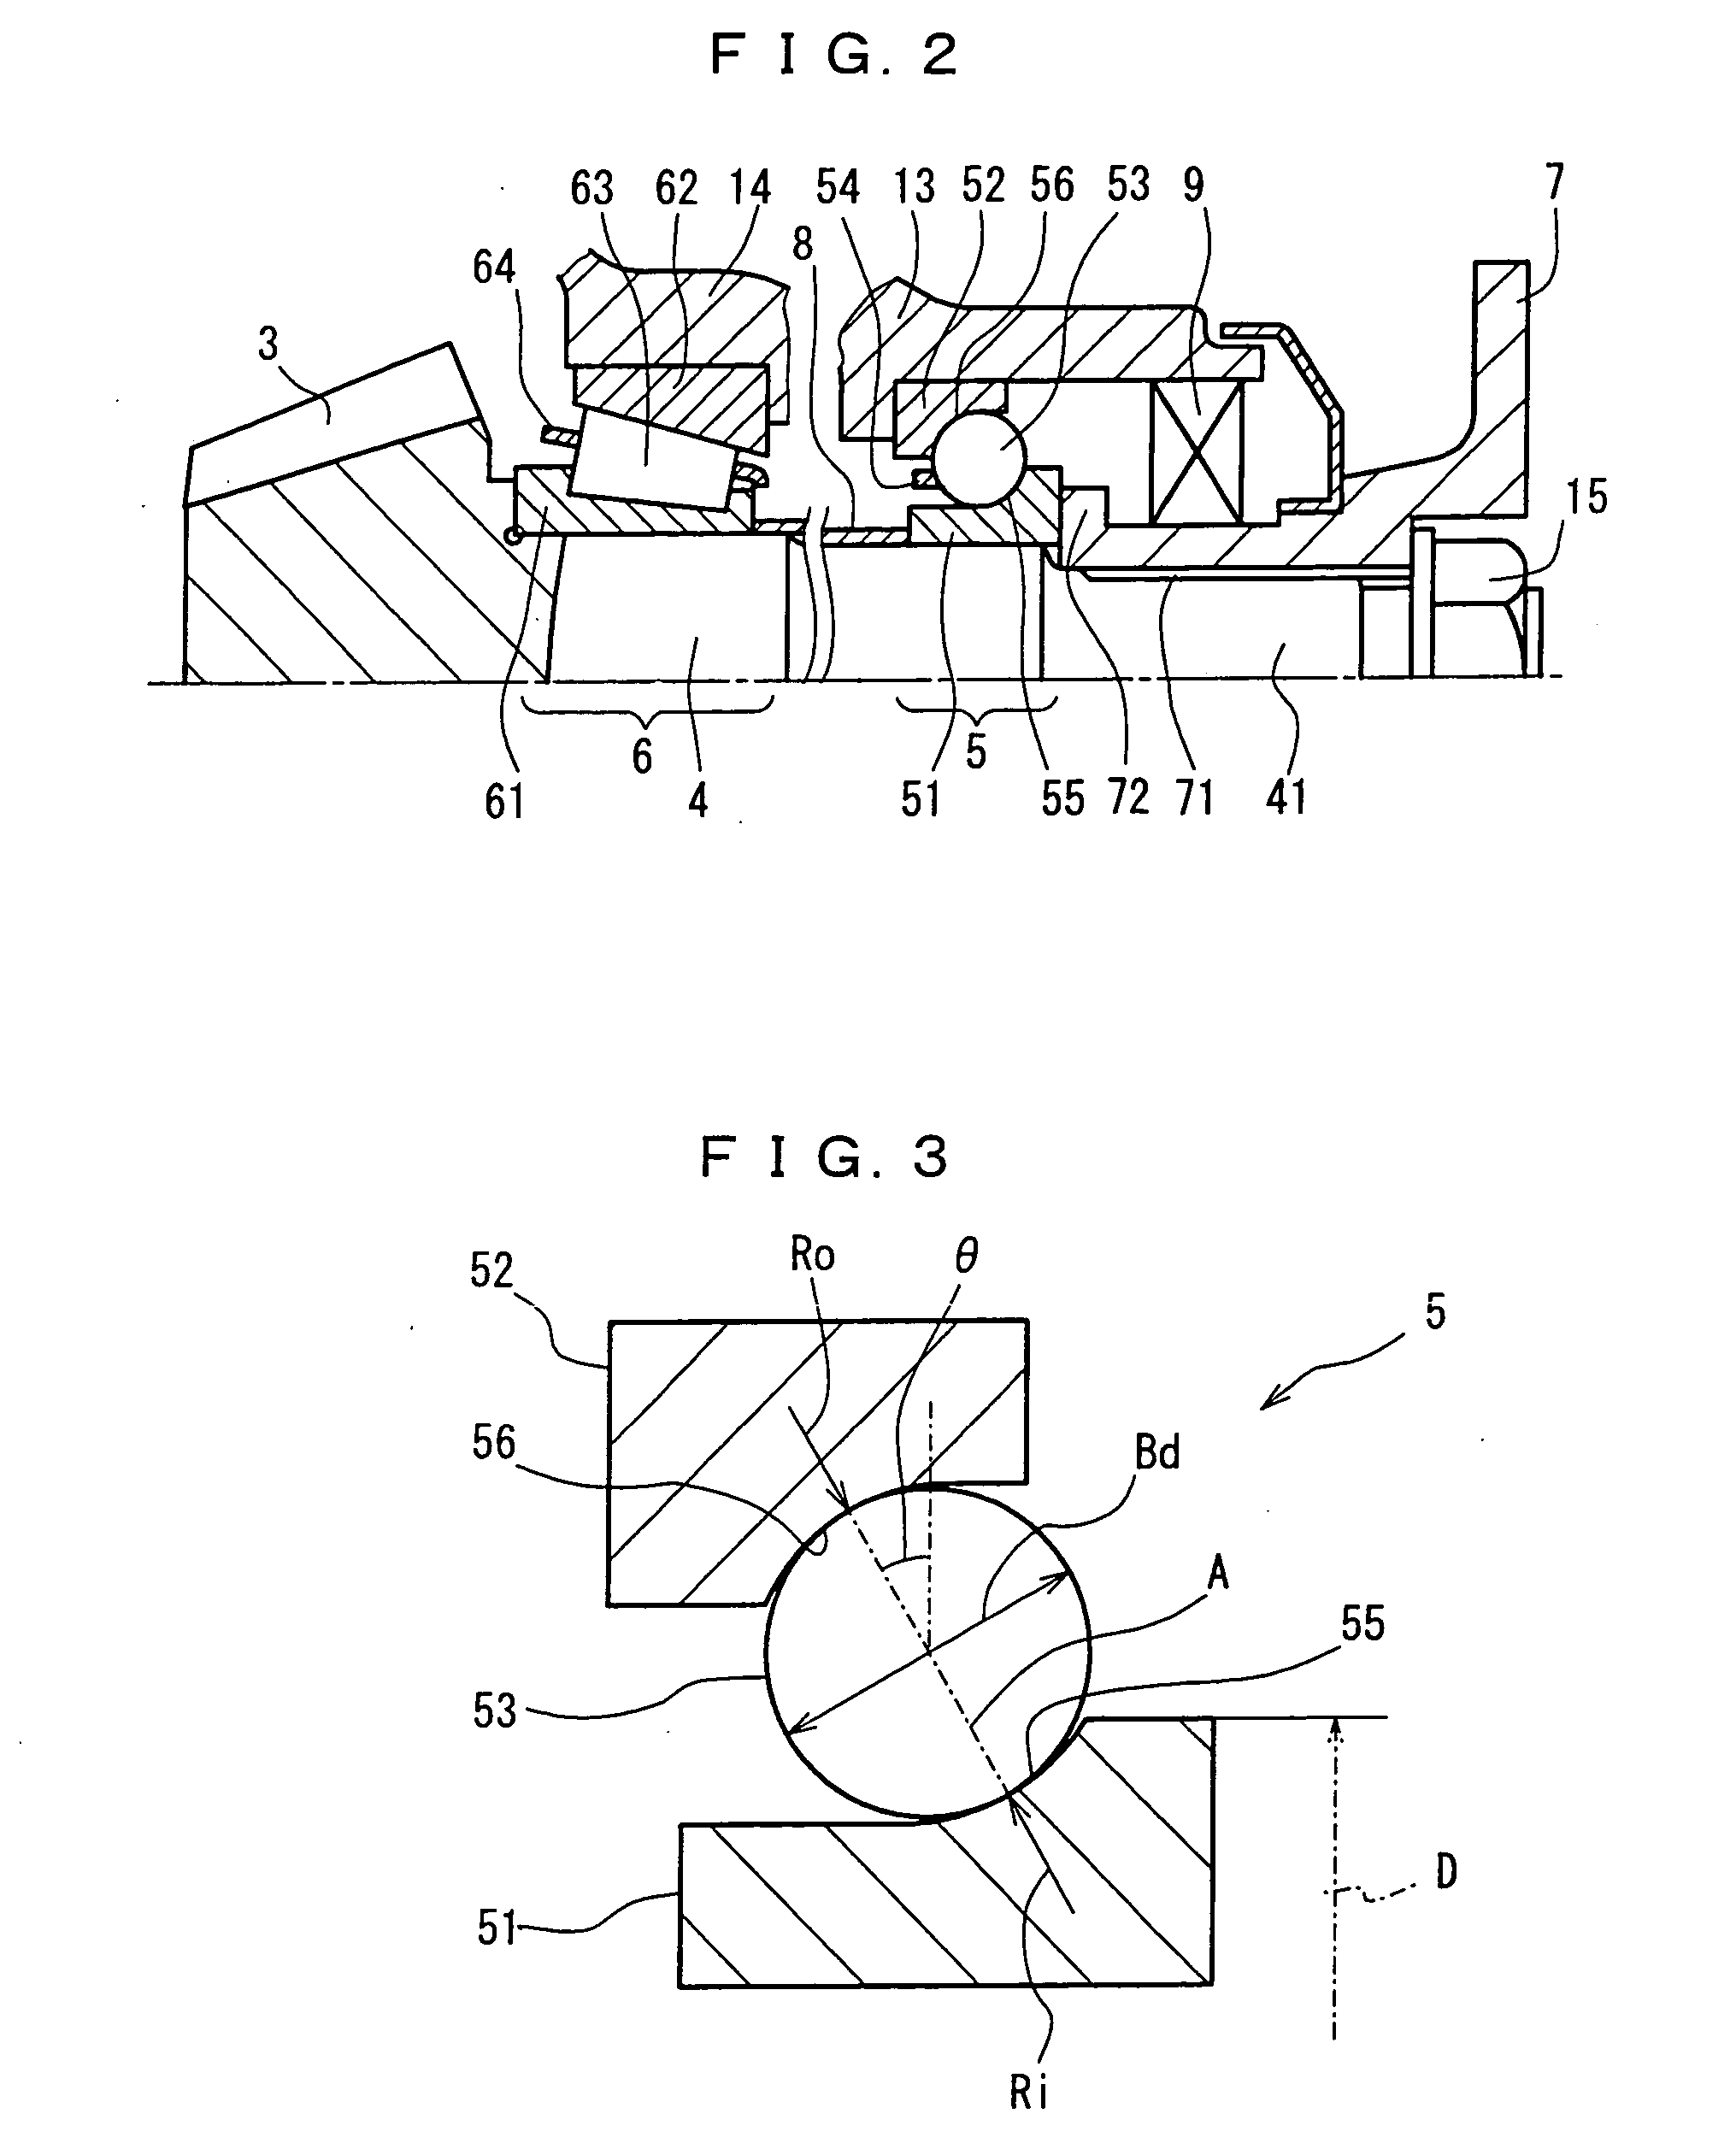 Bearing apparatus for supporting pinion shaft